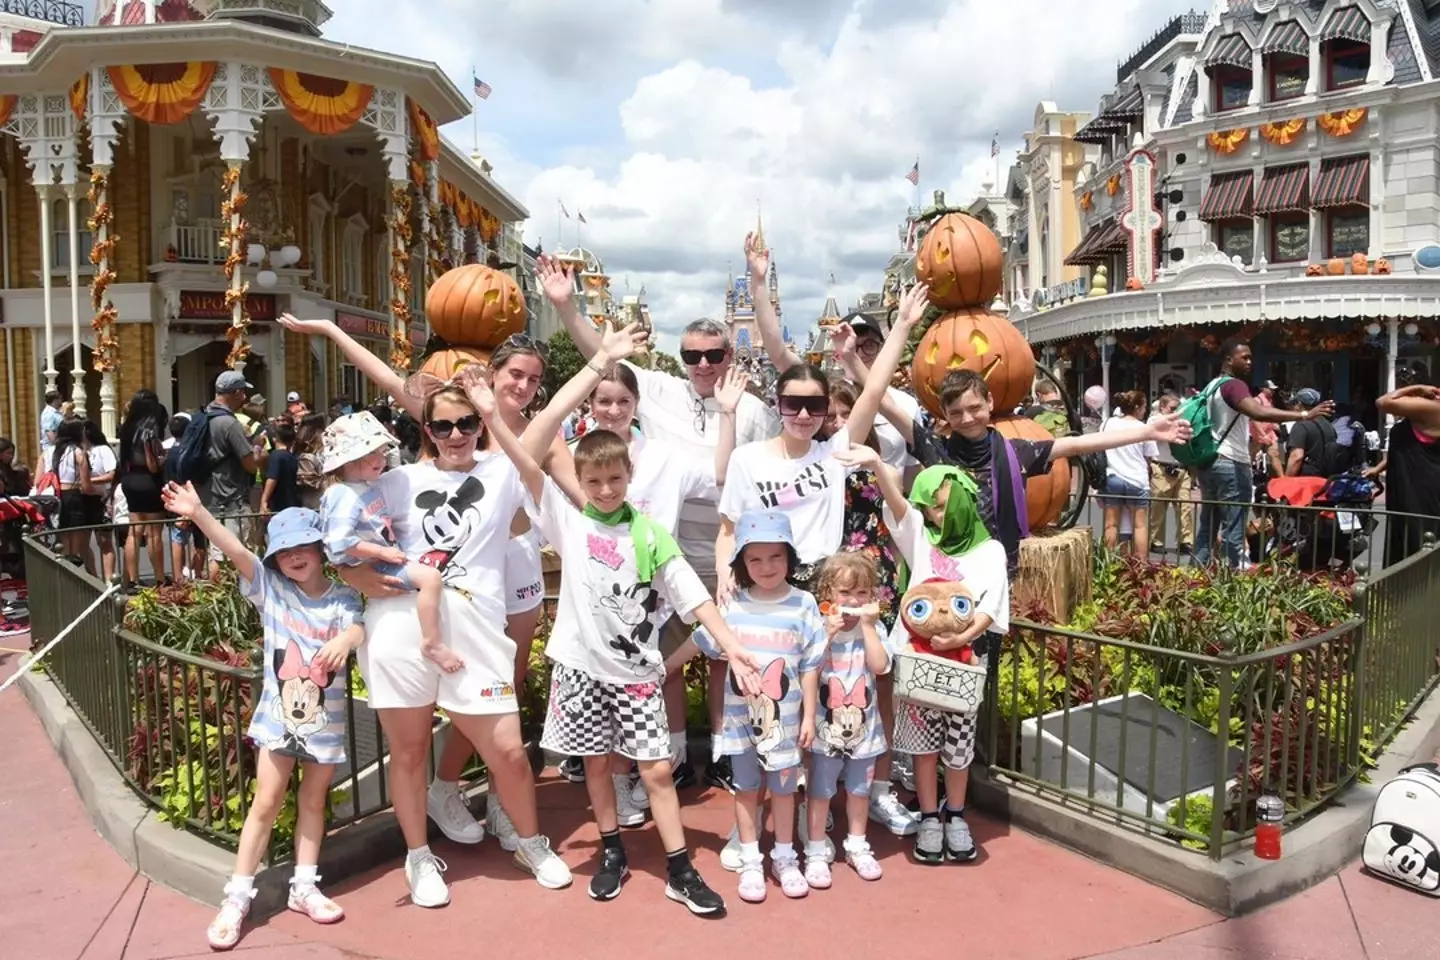 The Radford Family have visited Disneyland three times in two years.